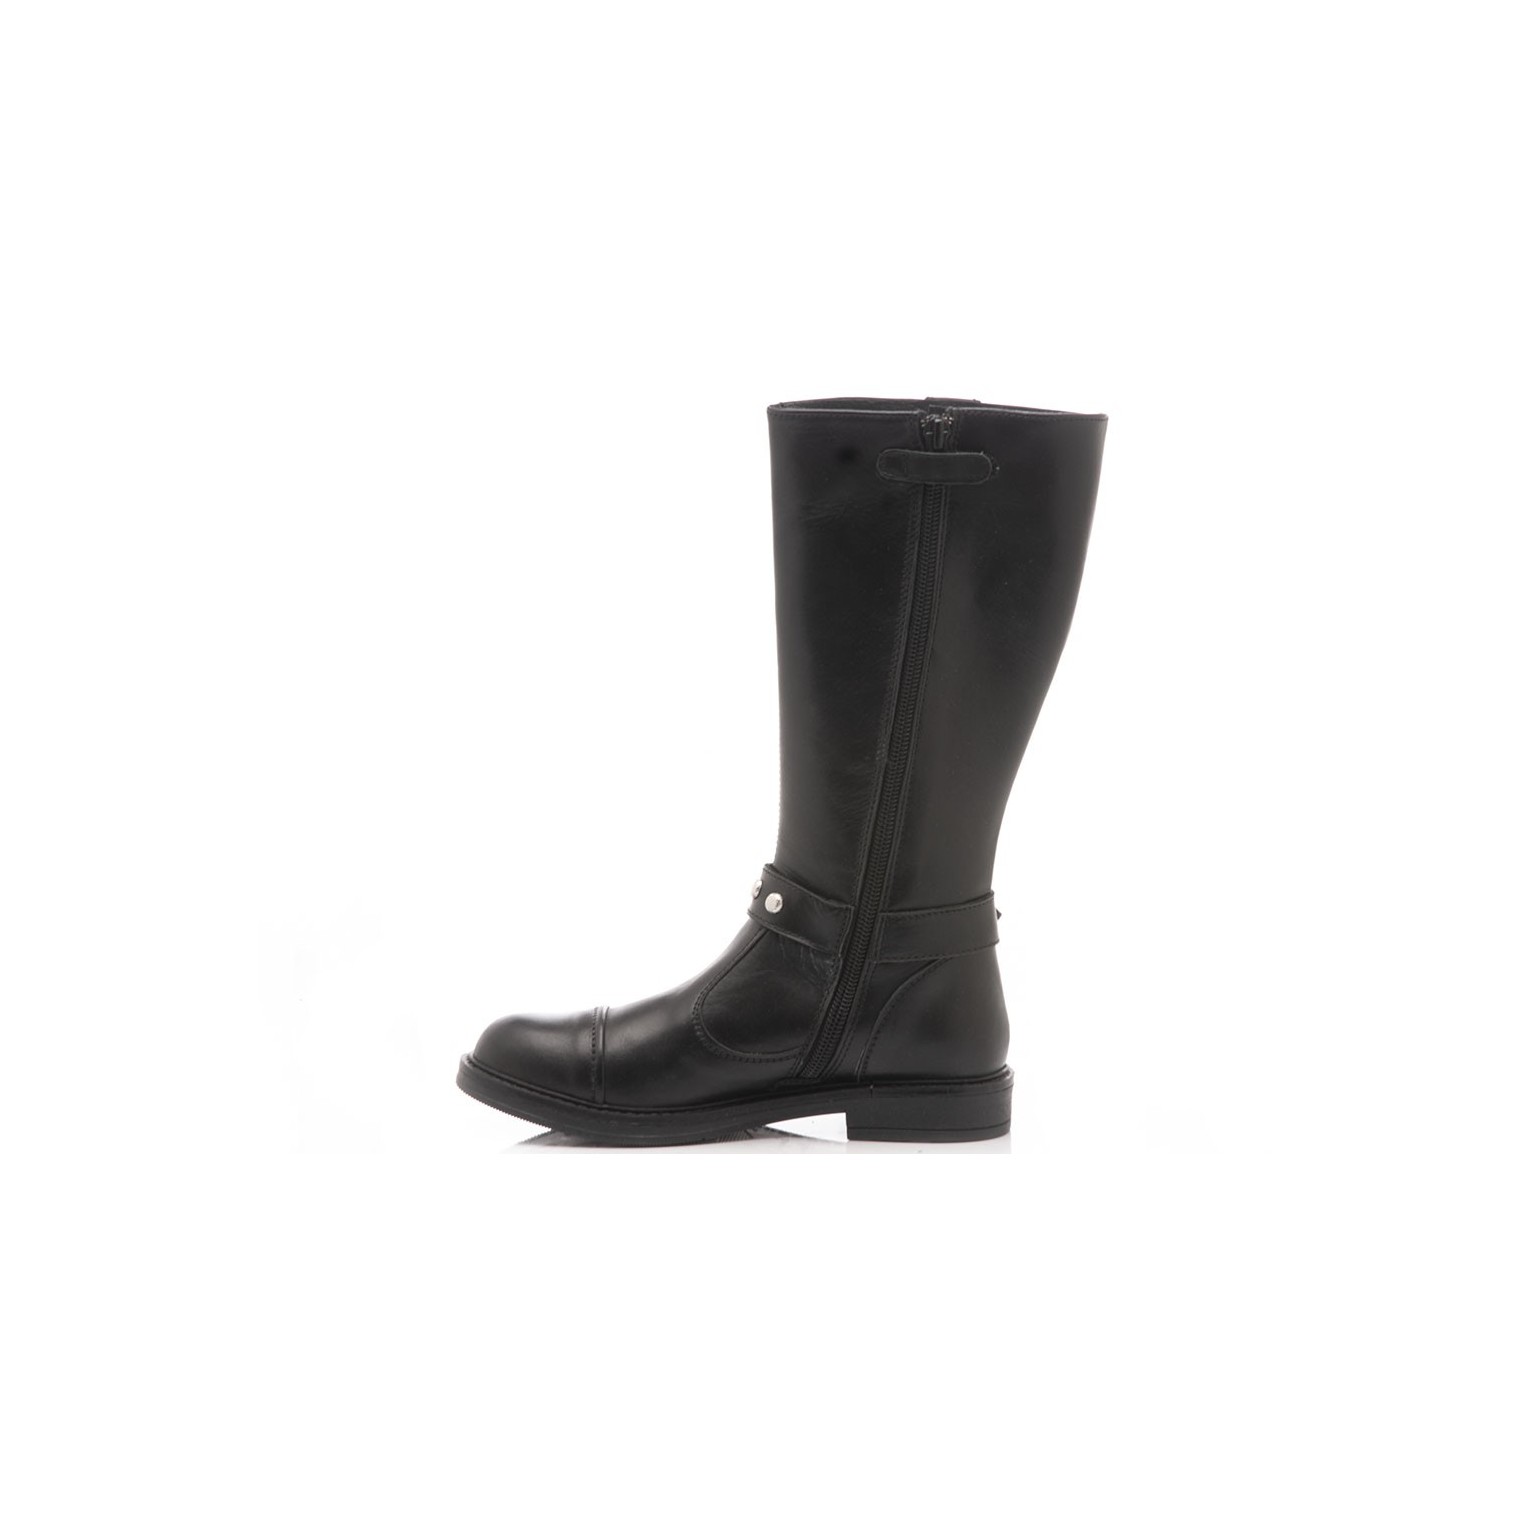 Ciao Children's Boots Leather Black 7773